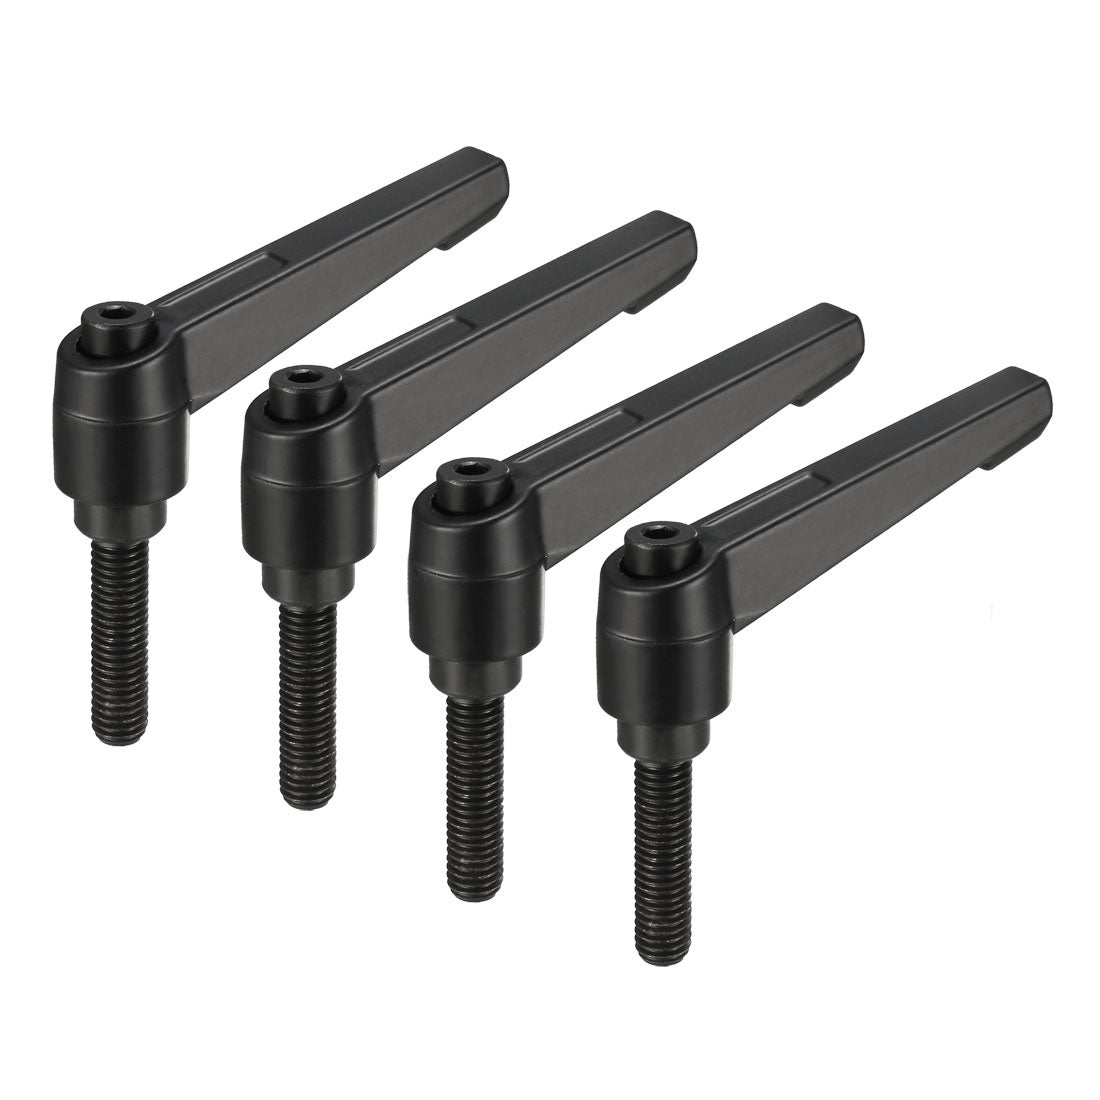 Uxcell Uxcell M6 x 25mmThread Push Button Ratchet Level Adjustable Handle Male Threaded Stud 4Pcs